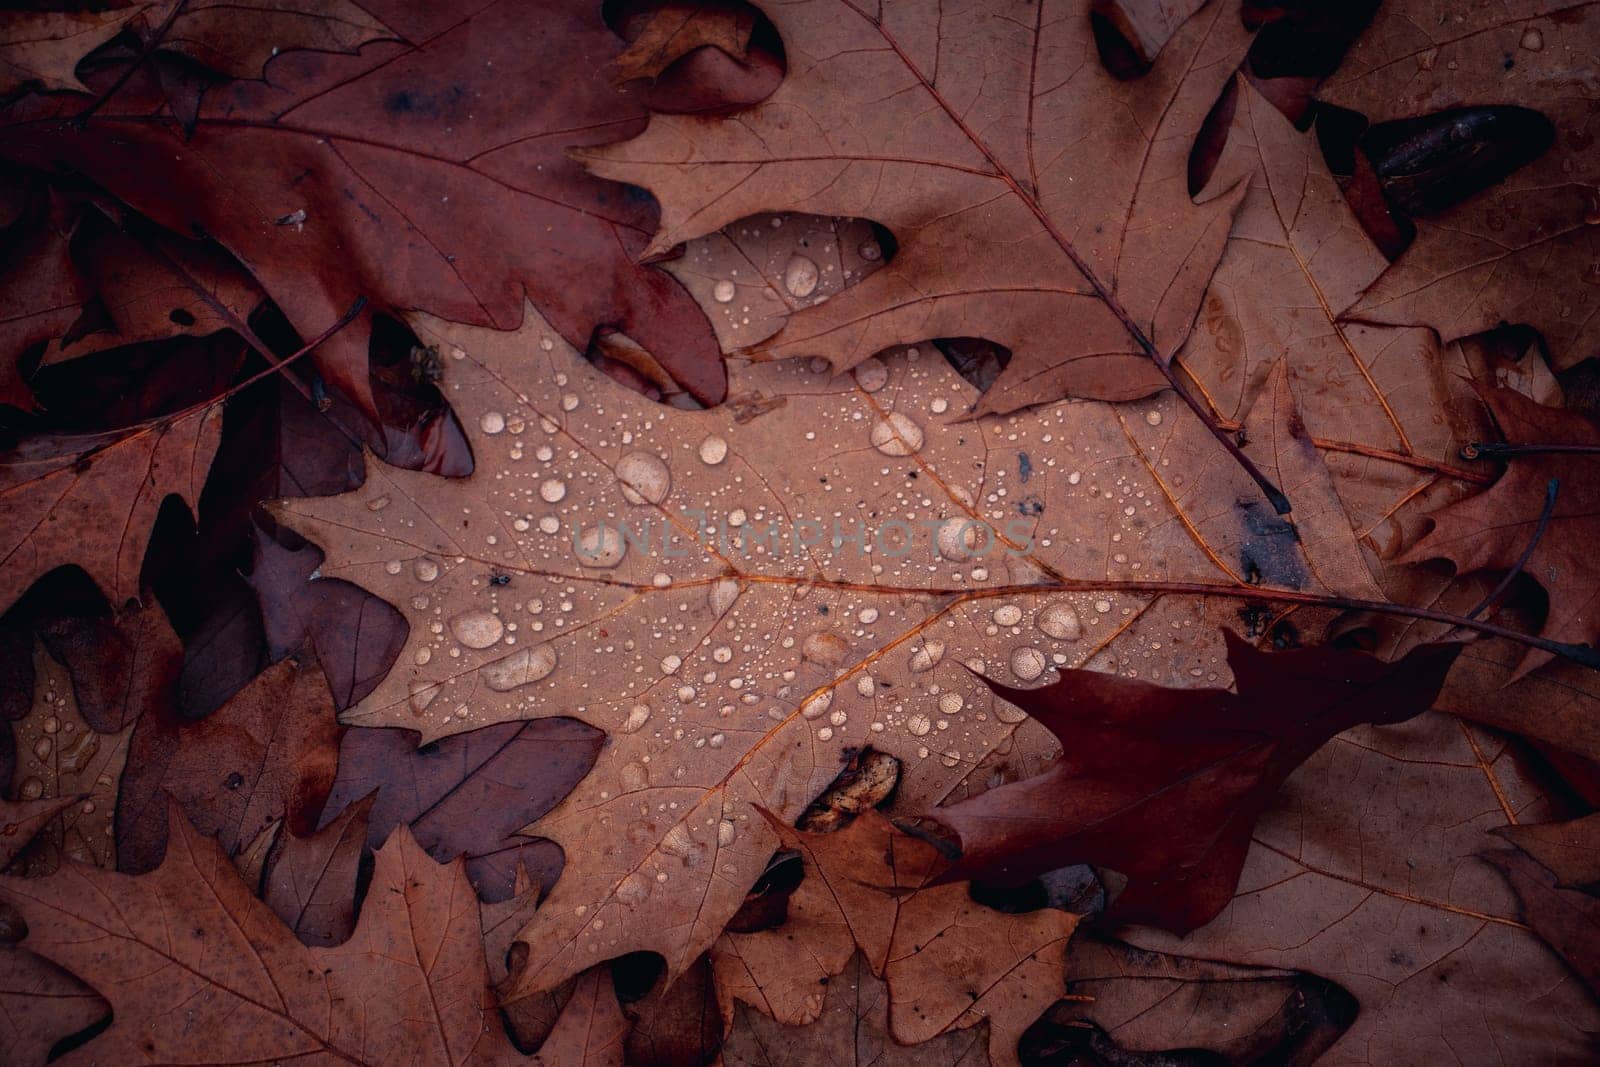 Wet oak leaves on the ground in rainy forest concept photo. Autumn atmosphere image. by _Nataly_Nati_